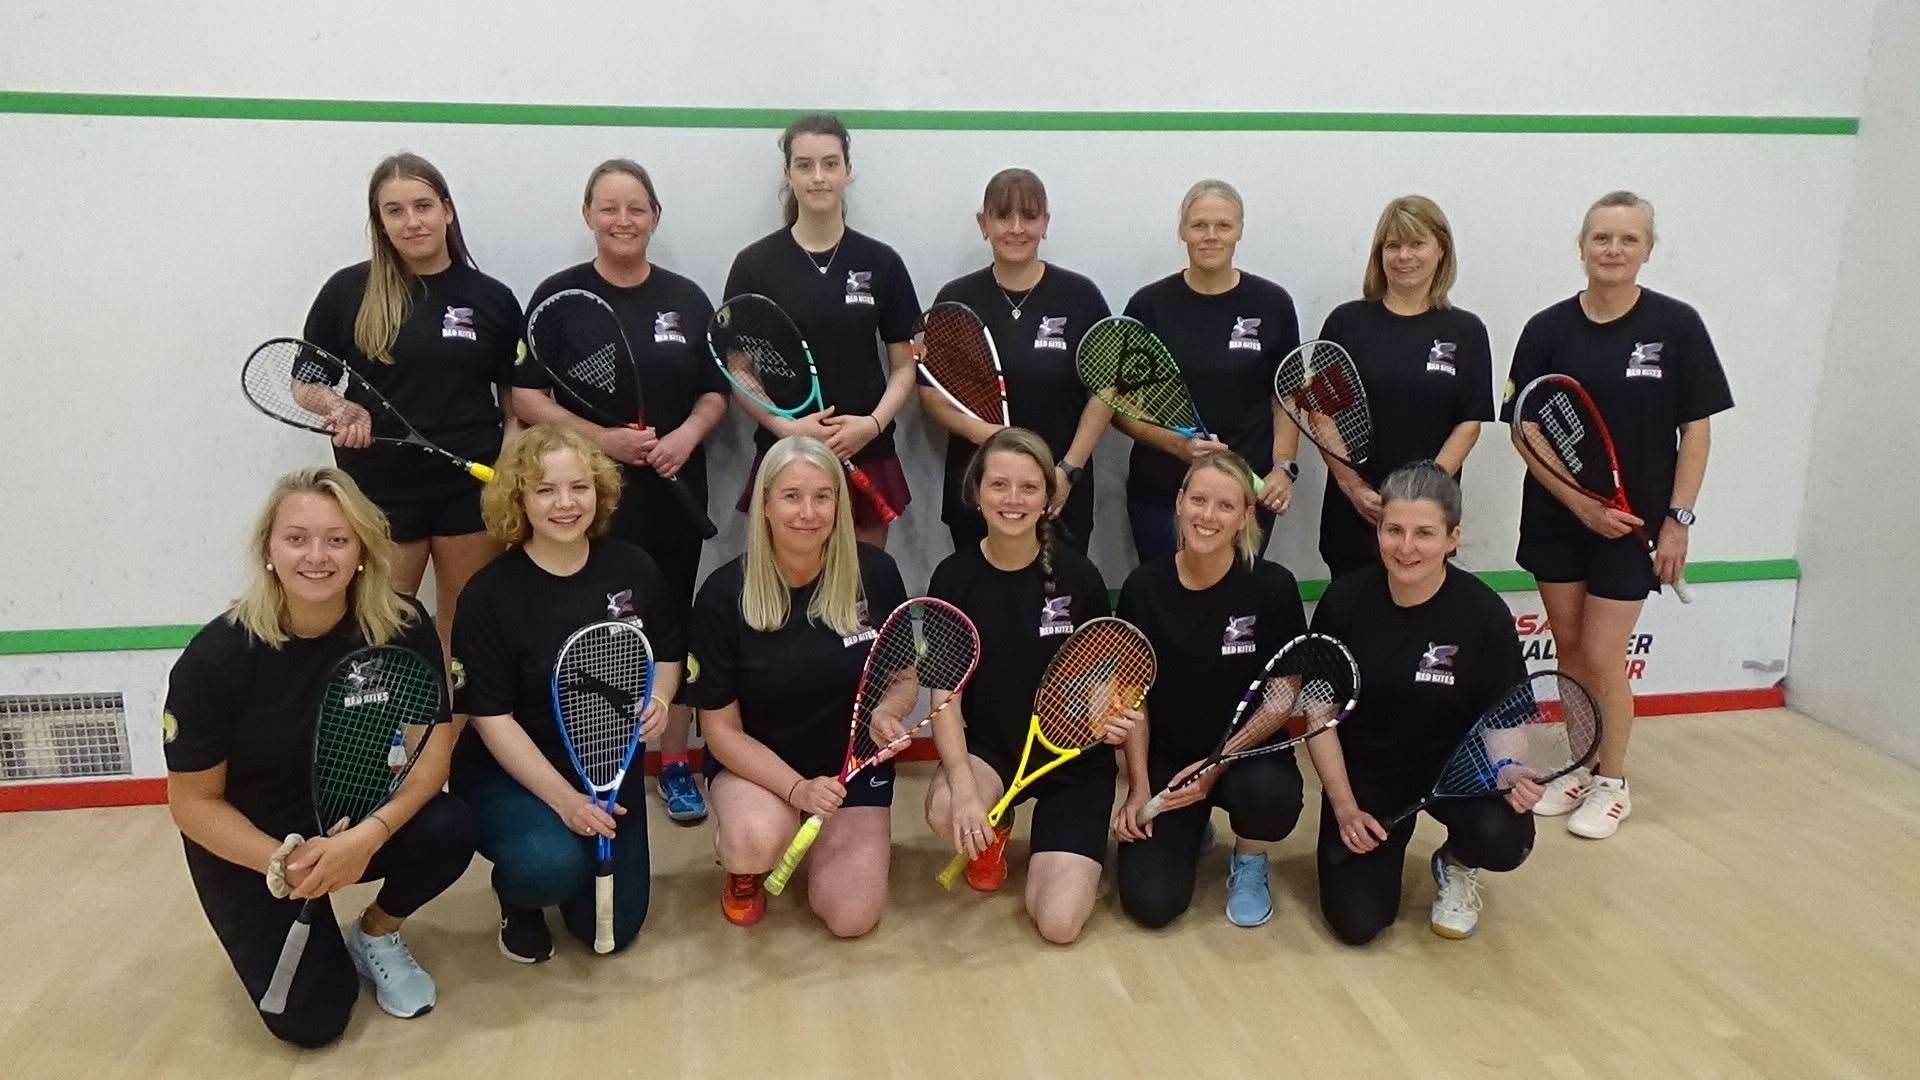 Inverness Red Kites has been launched at Inverness Tennis and Squash Club.